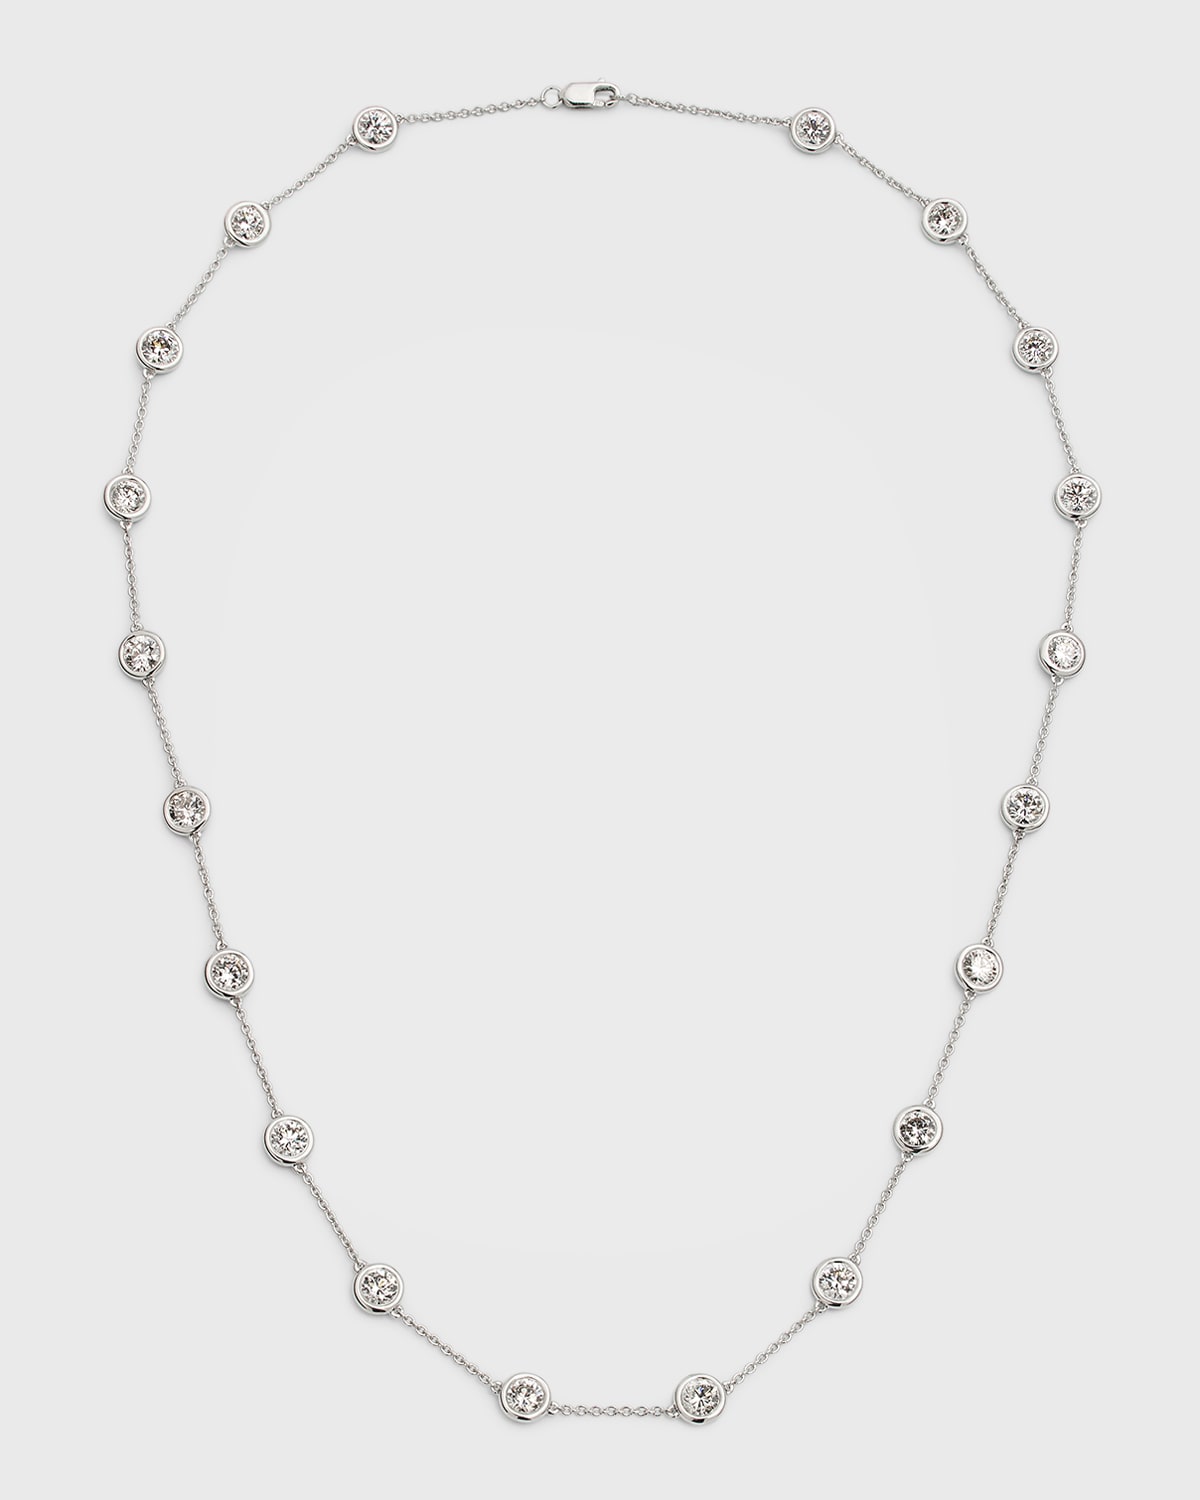 18k White Gold Necklace | Neiman Marcus